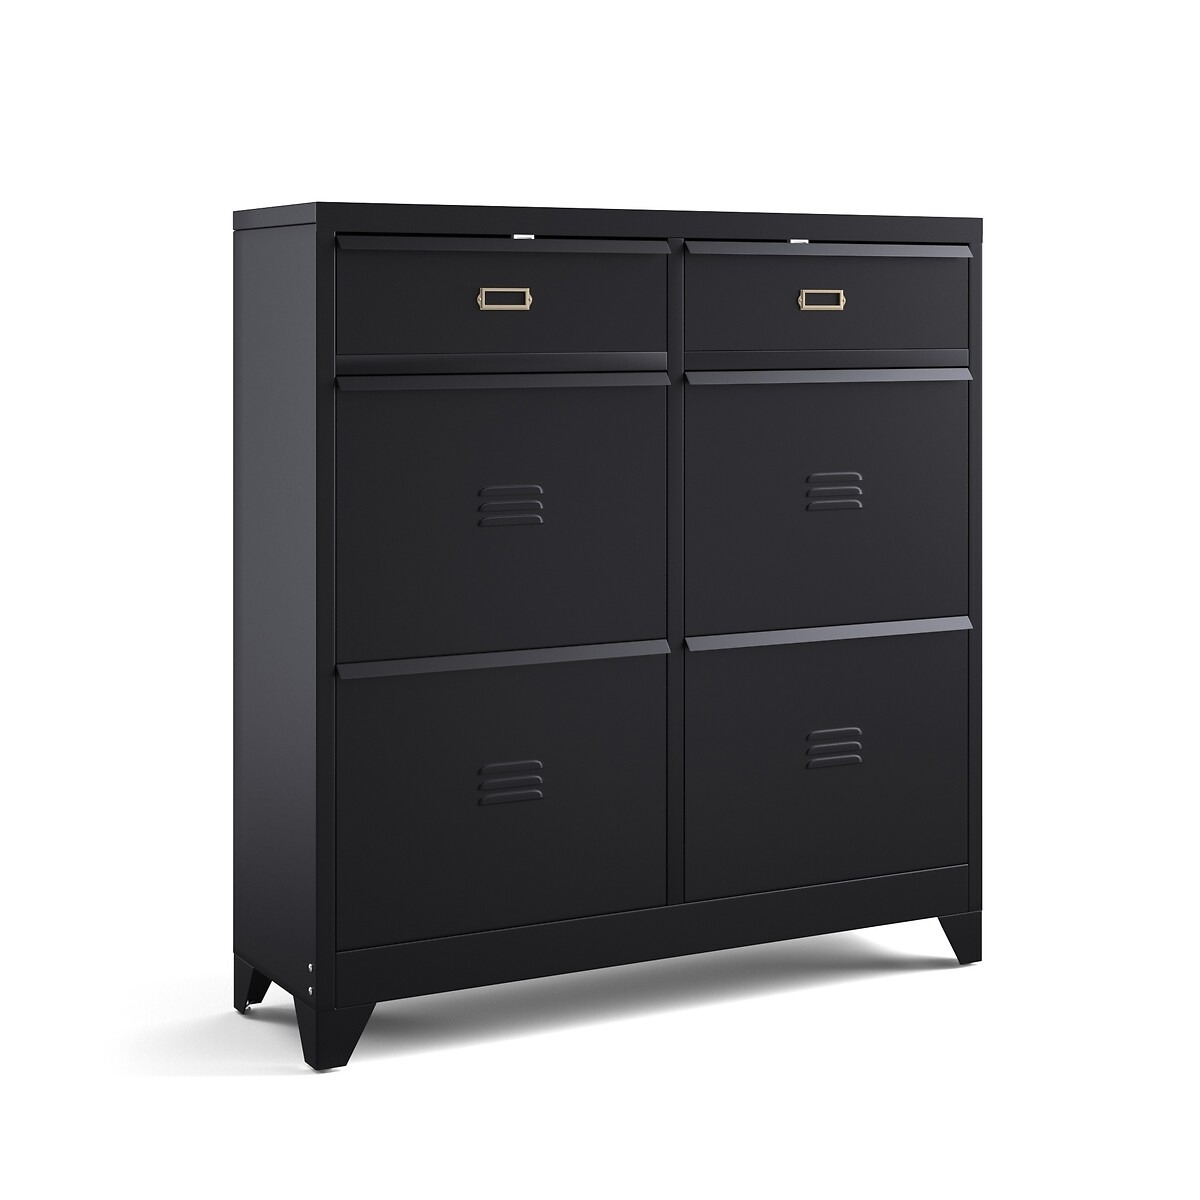 Hiba Shoe Cabinet with 4 Compartments & 2 Drawers - image 1